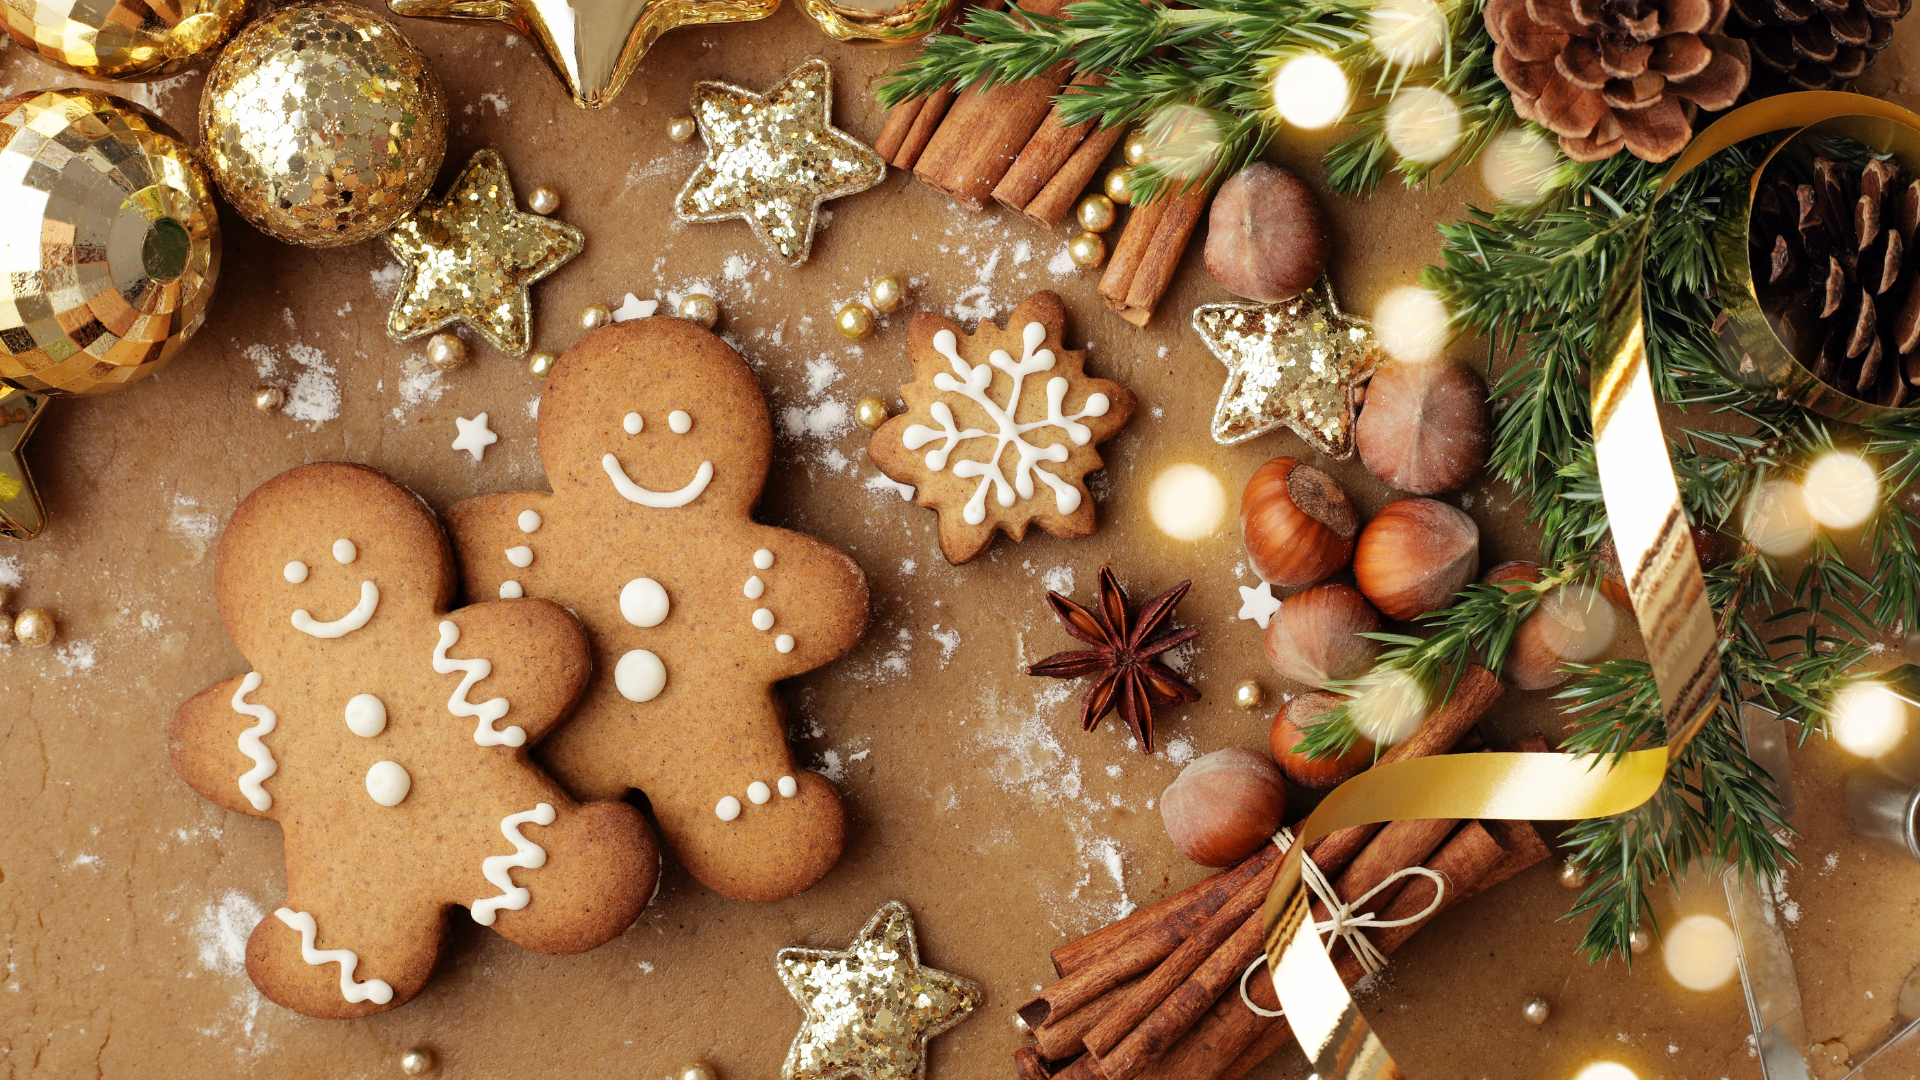 Is Holiday Food the problem?